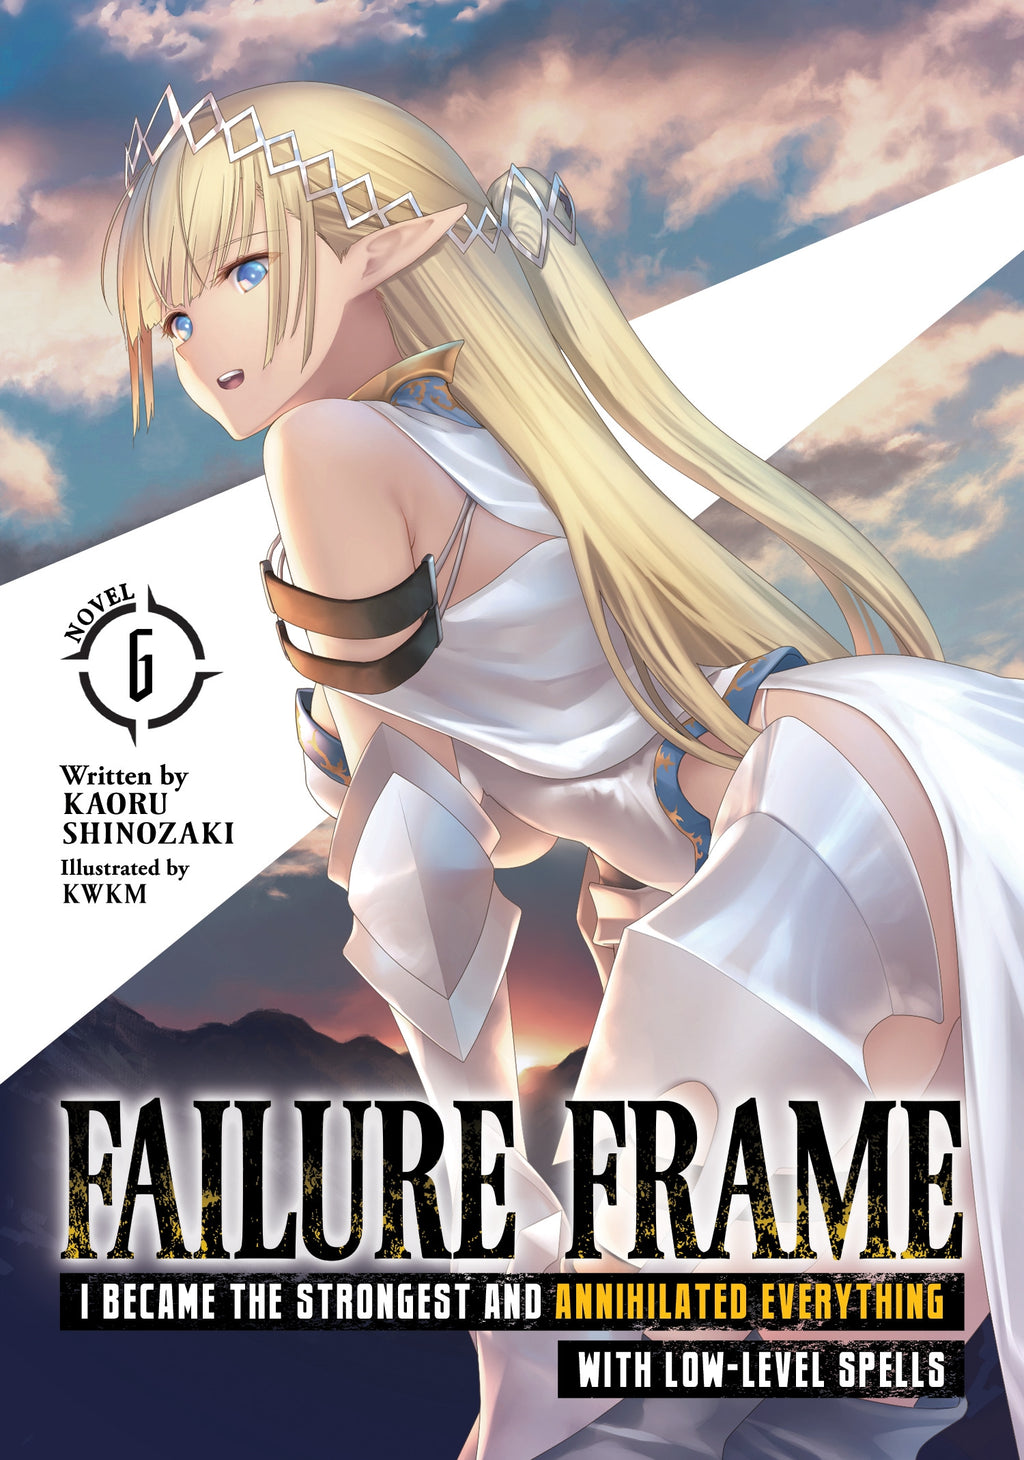 Light Novel Volume 06 | I Became the Strongest With The Failure Frame【Abnormal  State Skill】As I Devastated Everything Wiki | Fandom